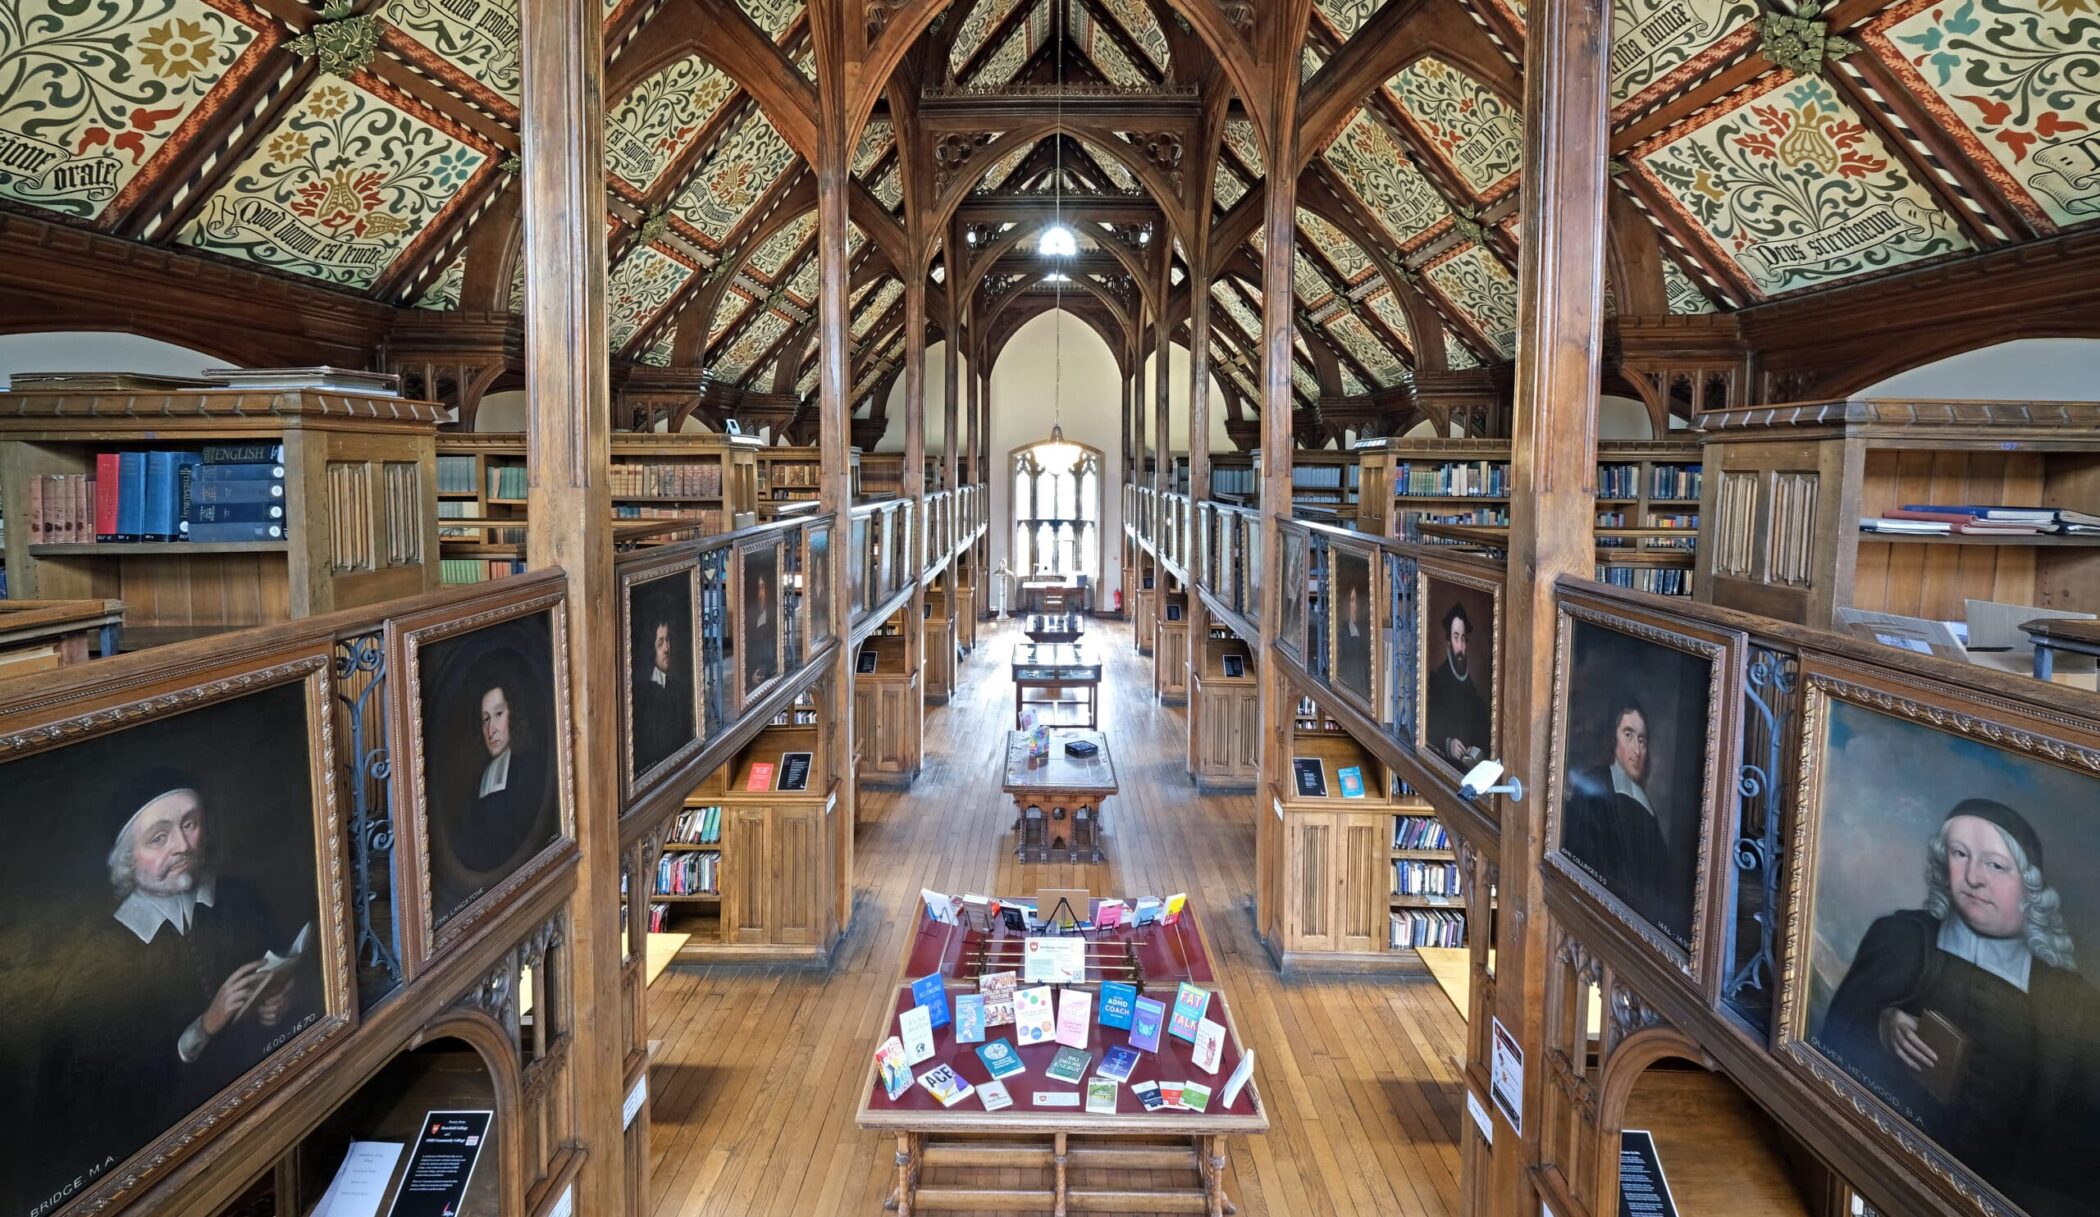 Mansfield College library featuring a painted ceiling, portraits, books, and chairs.